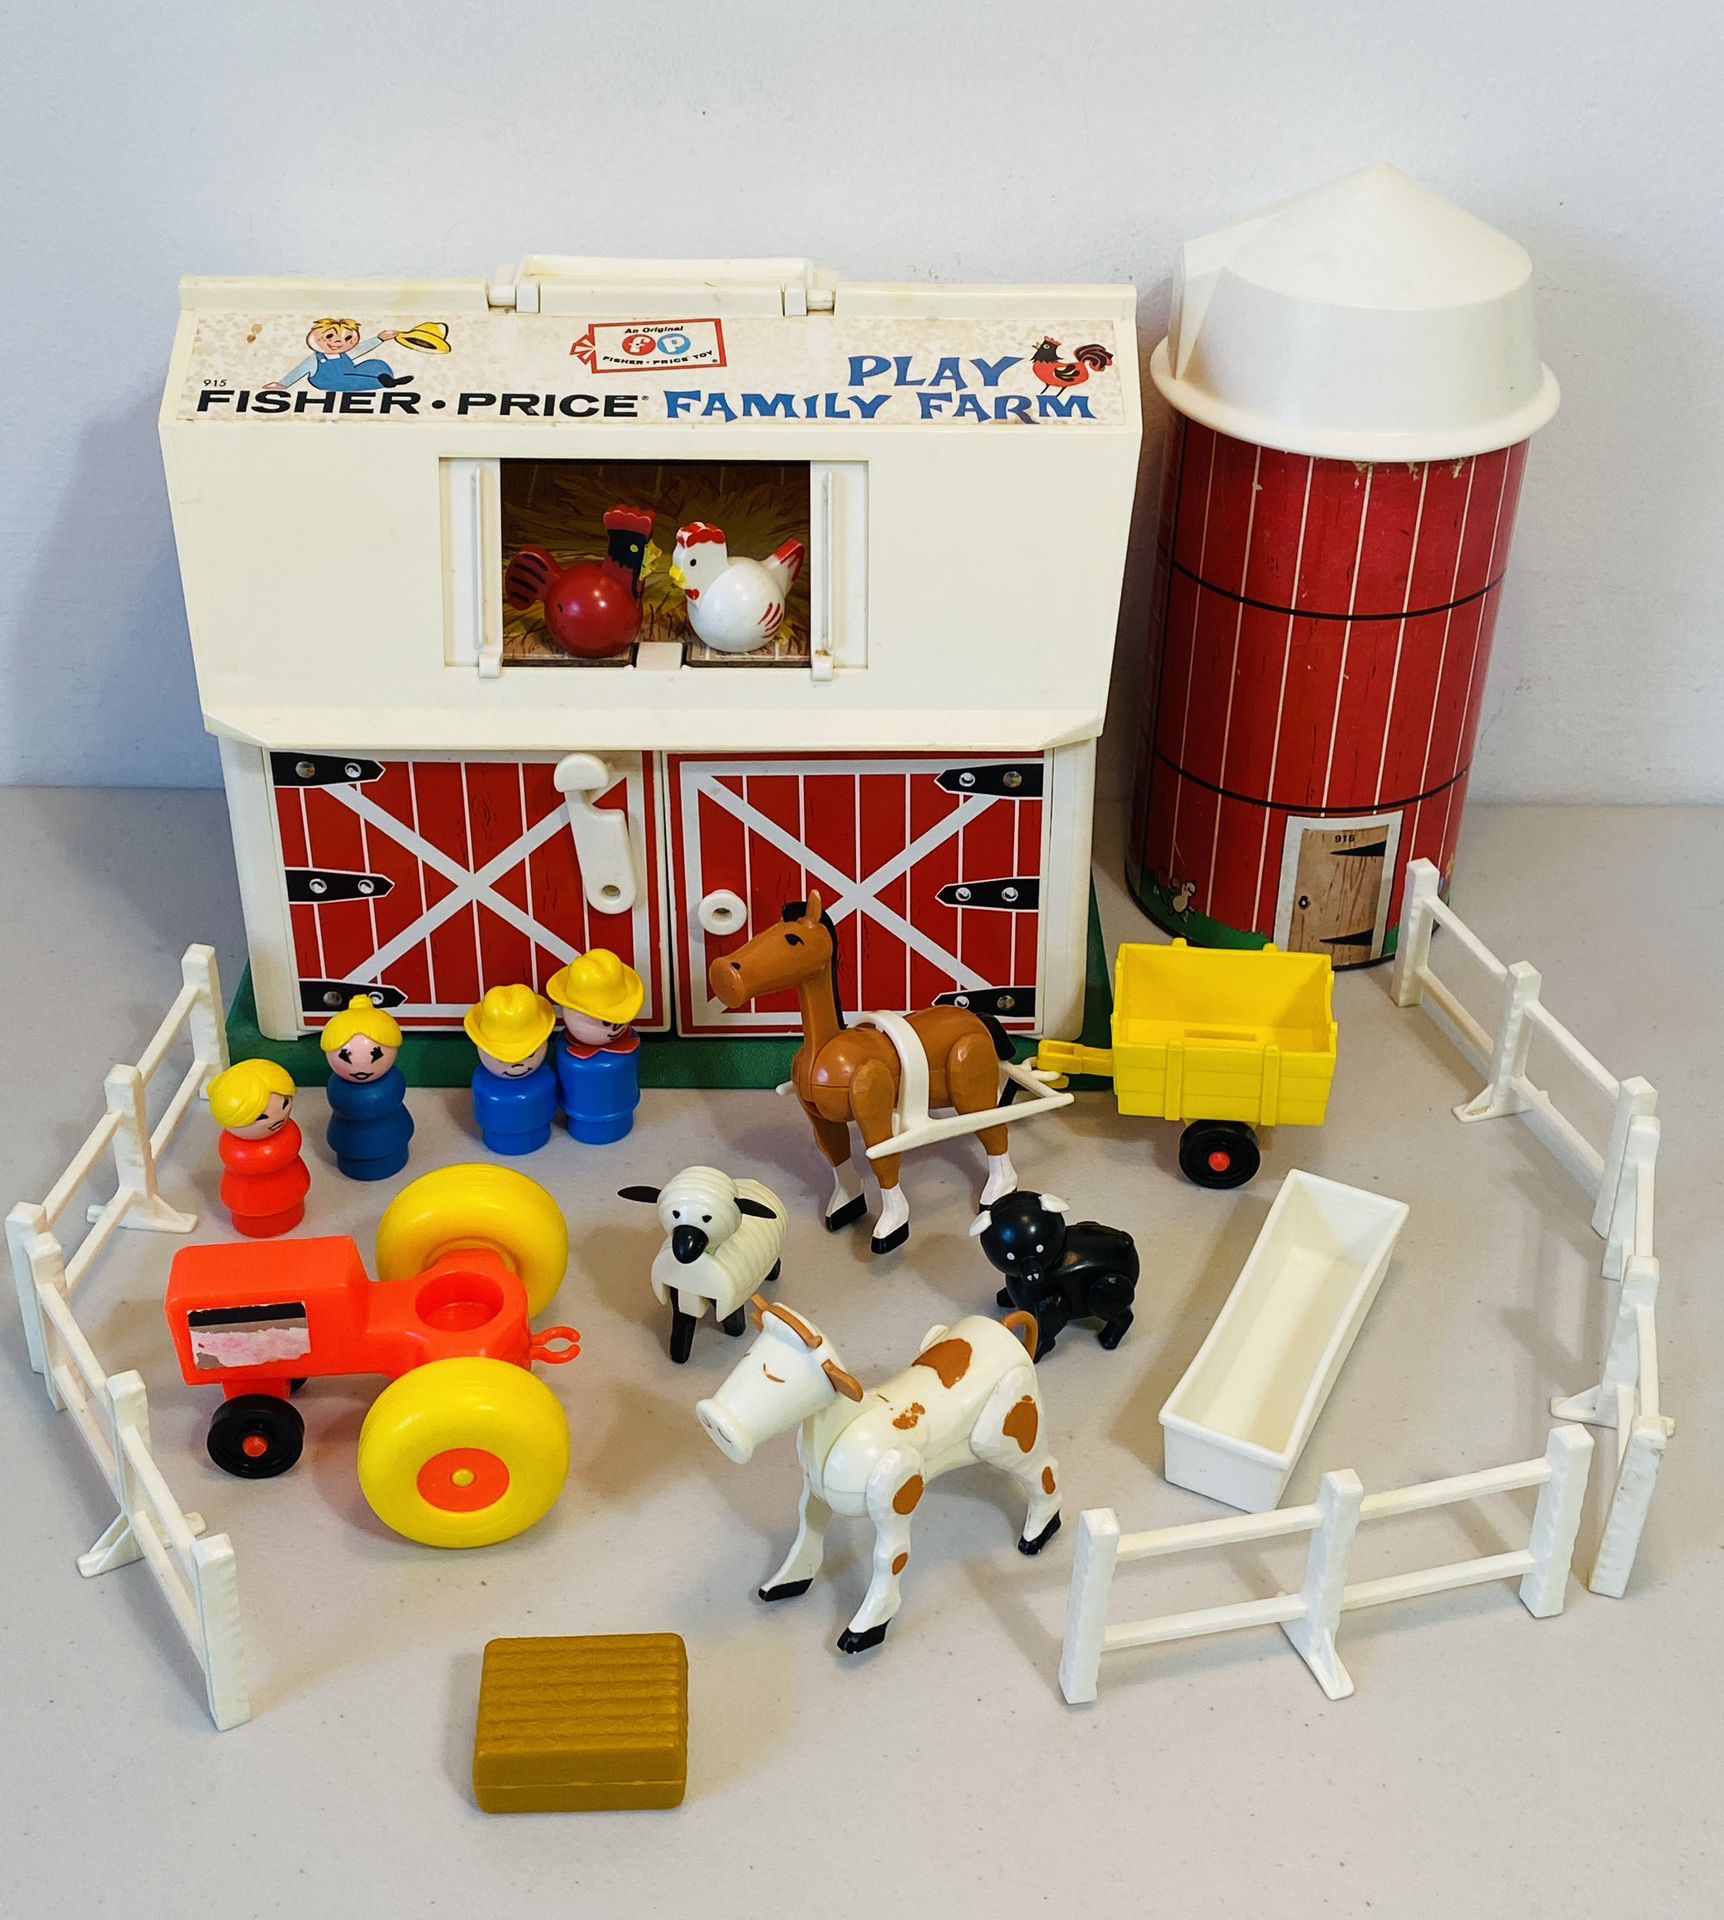 VNTG 1967 Fisher-Price Little People Family Play Farm 915 Barn,Silo,20 Accessory